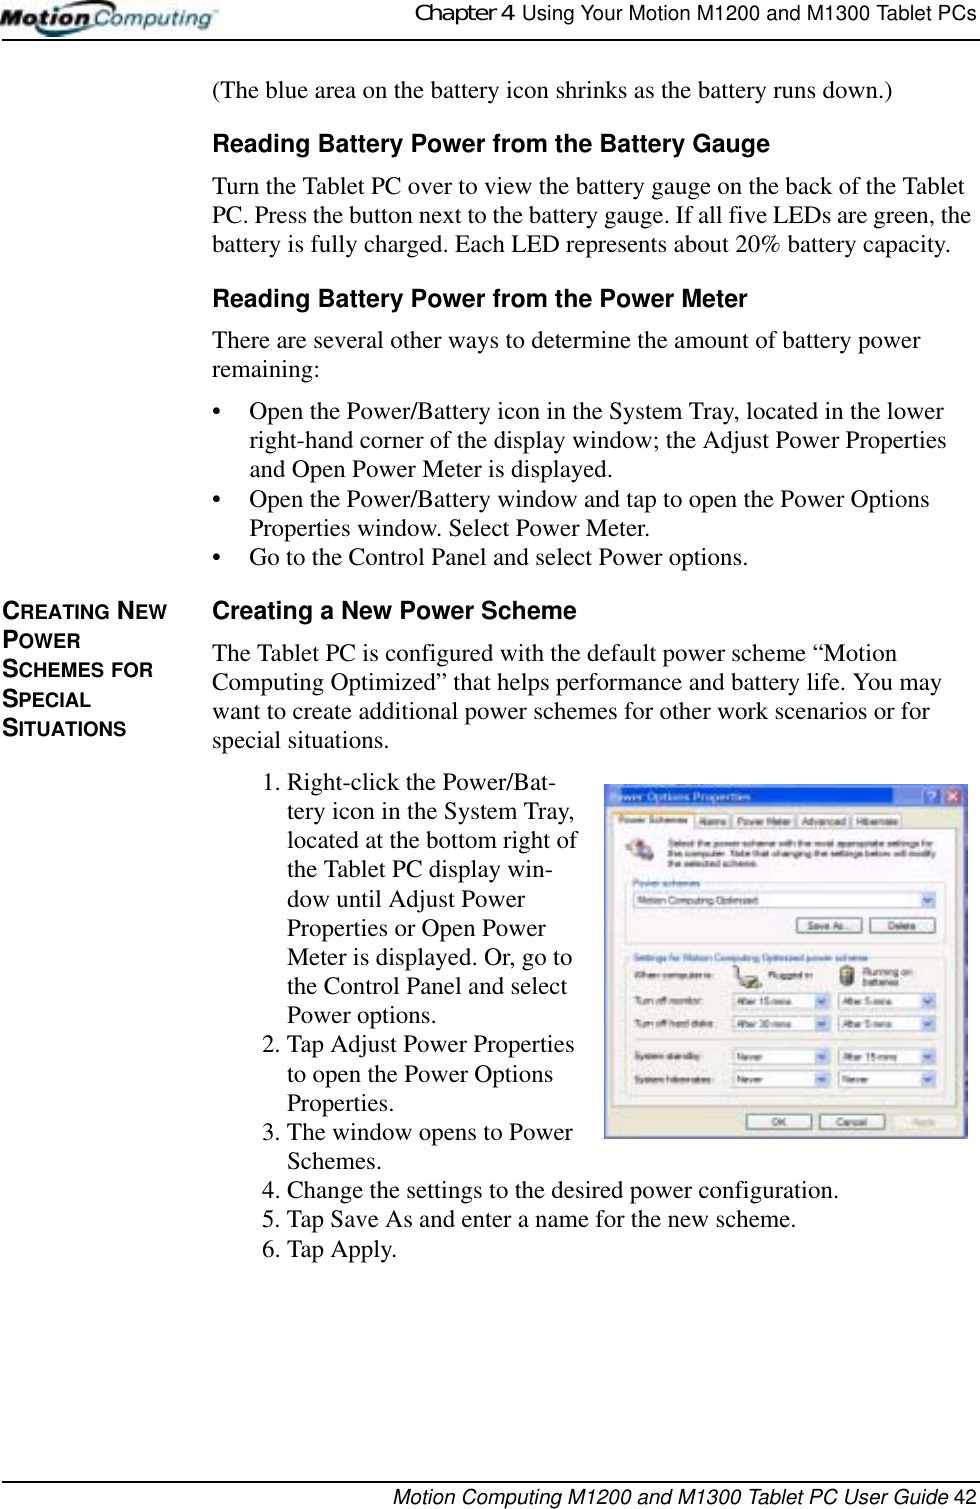 Chapter 4  Using Your Motion M1200 and M1300 Tablet PCsMotion Computing M1200 and M1300 Tablet PC User Guide 42(The blue area on the battery icon shrinks as the battery runs down.)Reading Battery Power from the Battery GaugeTurn the Tablet PC over to view the battery gauge on the back of the Tablet PC. Press the button next to the battery gauge. If all five LEDs are green, the battery is fully charged. Each LED represents about 20% battery capacity.Reading Battery Power from the Power MeterThere are several other ways to determine the amount of battery power remaining:• Open the Power/Battery icon in the System Tray, located in the lower right-hand corner of the display window; the Adjust Power Properties and Open Power Meter is displayed. • Open the Power/Battery window and tap to open the Power Options Properties window. Select Power Meter.• Go to the Control Panel and select Power options.CREATING NEW POWER SCHEMES FOR SPECIAL SITUATIONSCreating a New Power SchemeThe Tablet PC is configured with the default power scheme “Motion Computing Optimized” that helps performance and battery life. You may want to create additional power schemes for other work scenarios or for special situations.1. Right-click the Power/Bat-tery icon in the System Tray, located at the bottom right of the Tablet PC display win-dow until Adjust Power Properties or Open Power Meter is displayed. Or, go to the Control Panel and select Power options.2. Tap Adjust Power Properties to open the Power Options Properties.3. The window opens to Power Schemes.4. Change the settings to the desired power configuration.5. Tap Save As and enter a name for the new scheme.6. Tap Apply.